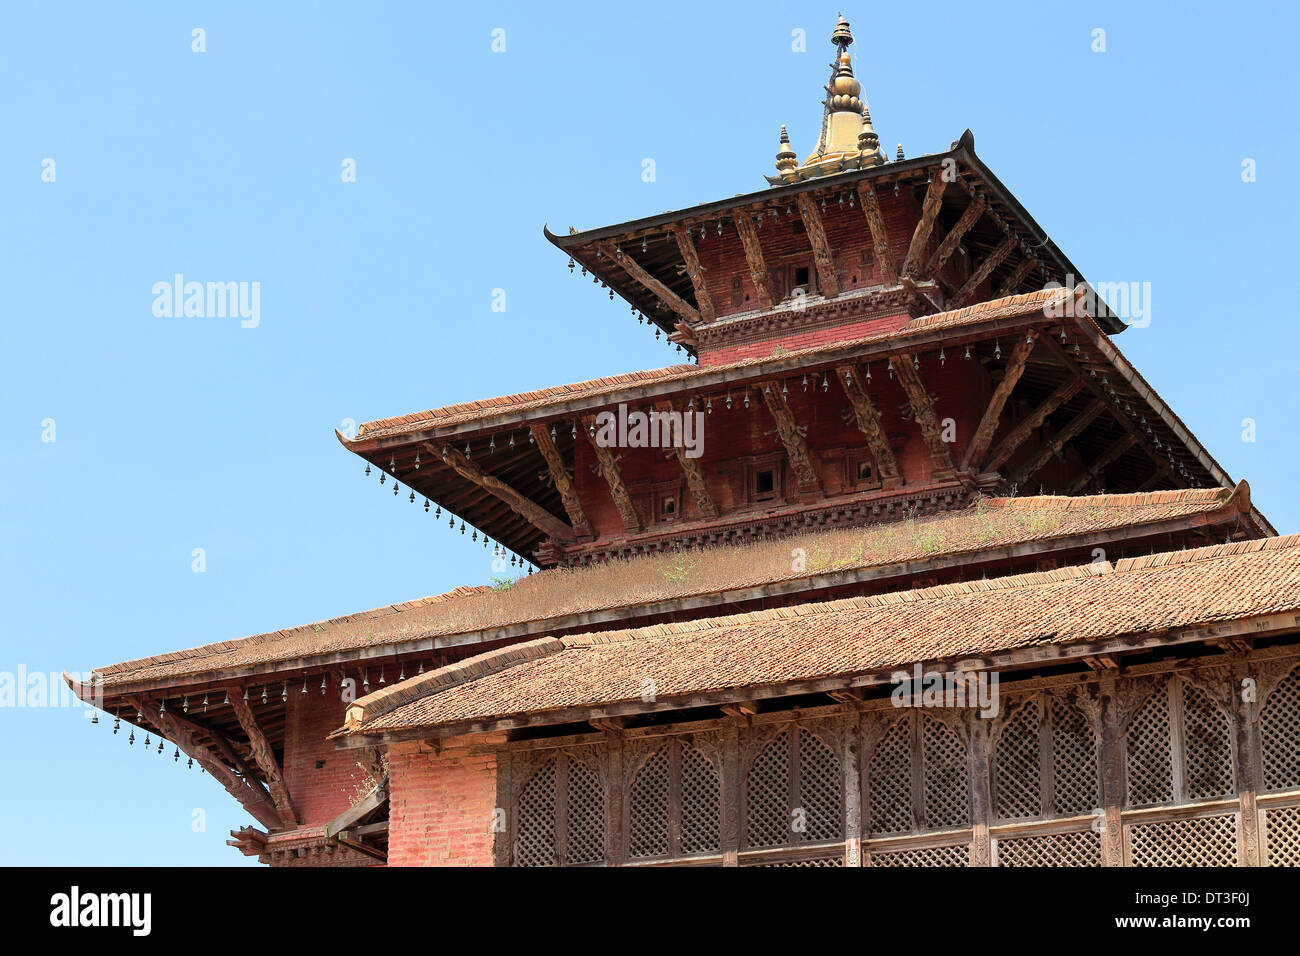 The tower of the Degutale temple in the Royal Palace complex of Patan-Lalitpur District-Nepal. 0097 Stock Photo